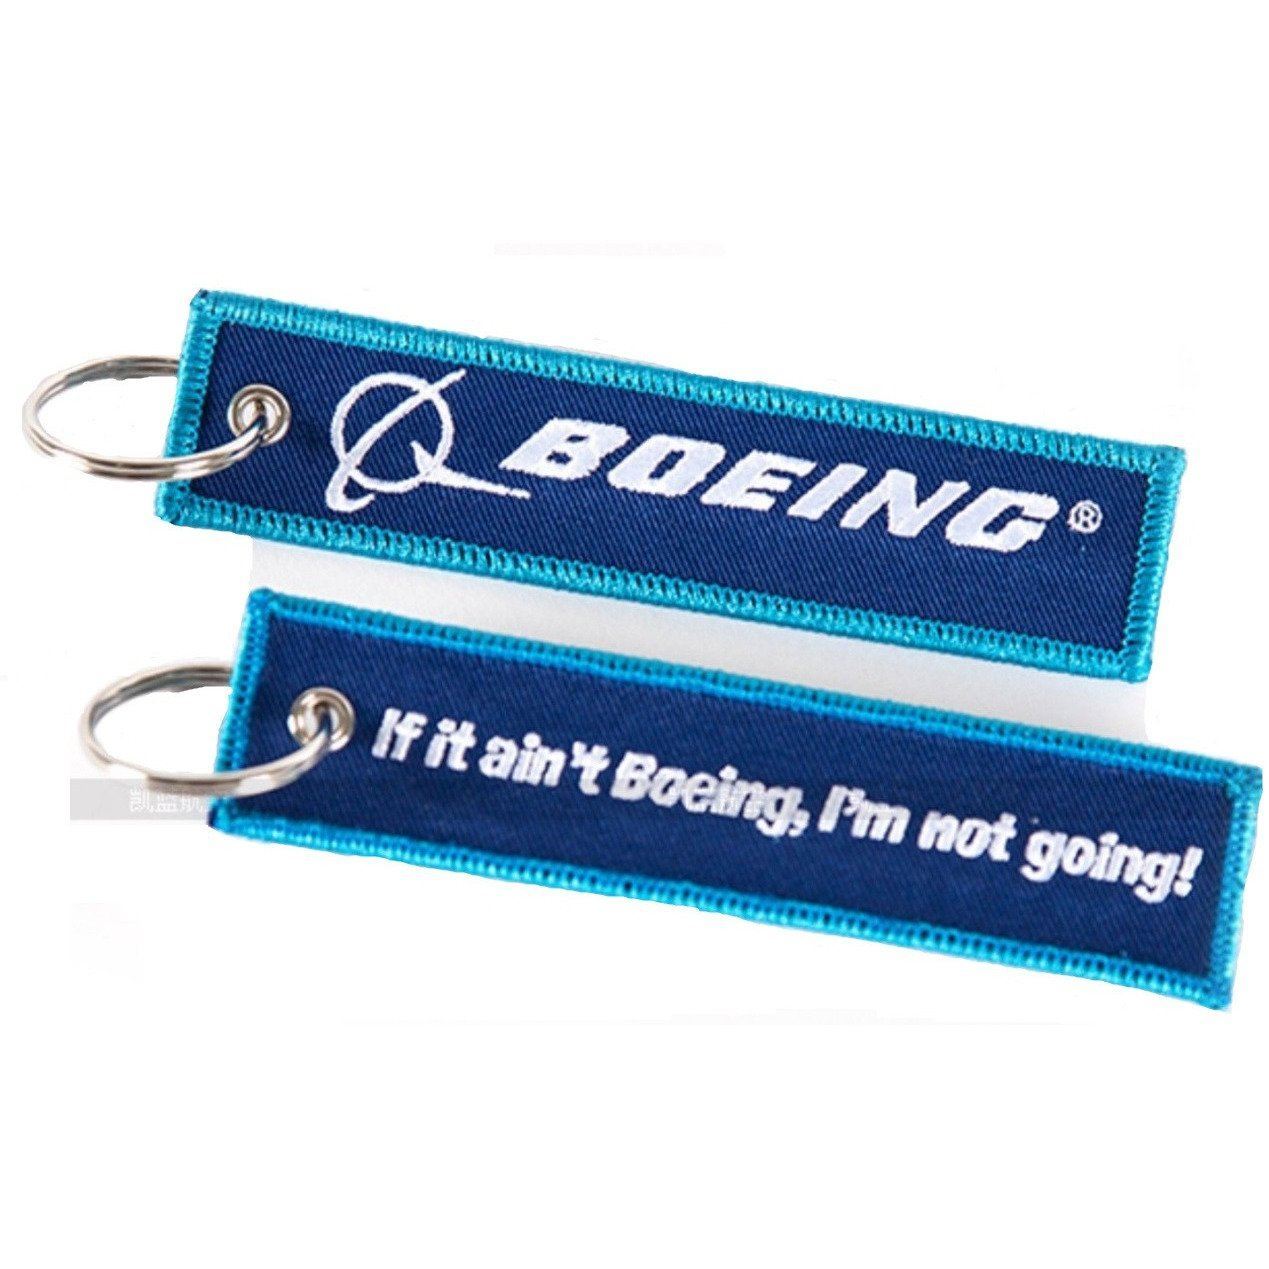 If It ain't BOEING I'm not Going! Key Chain